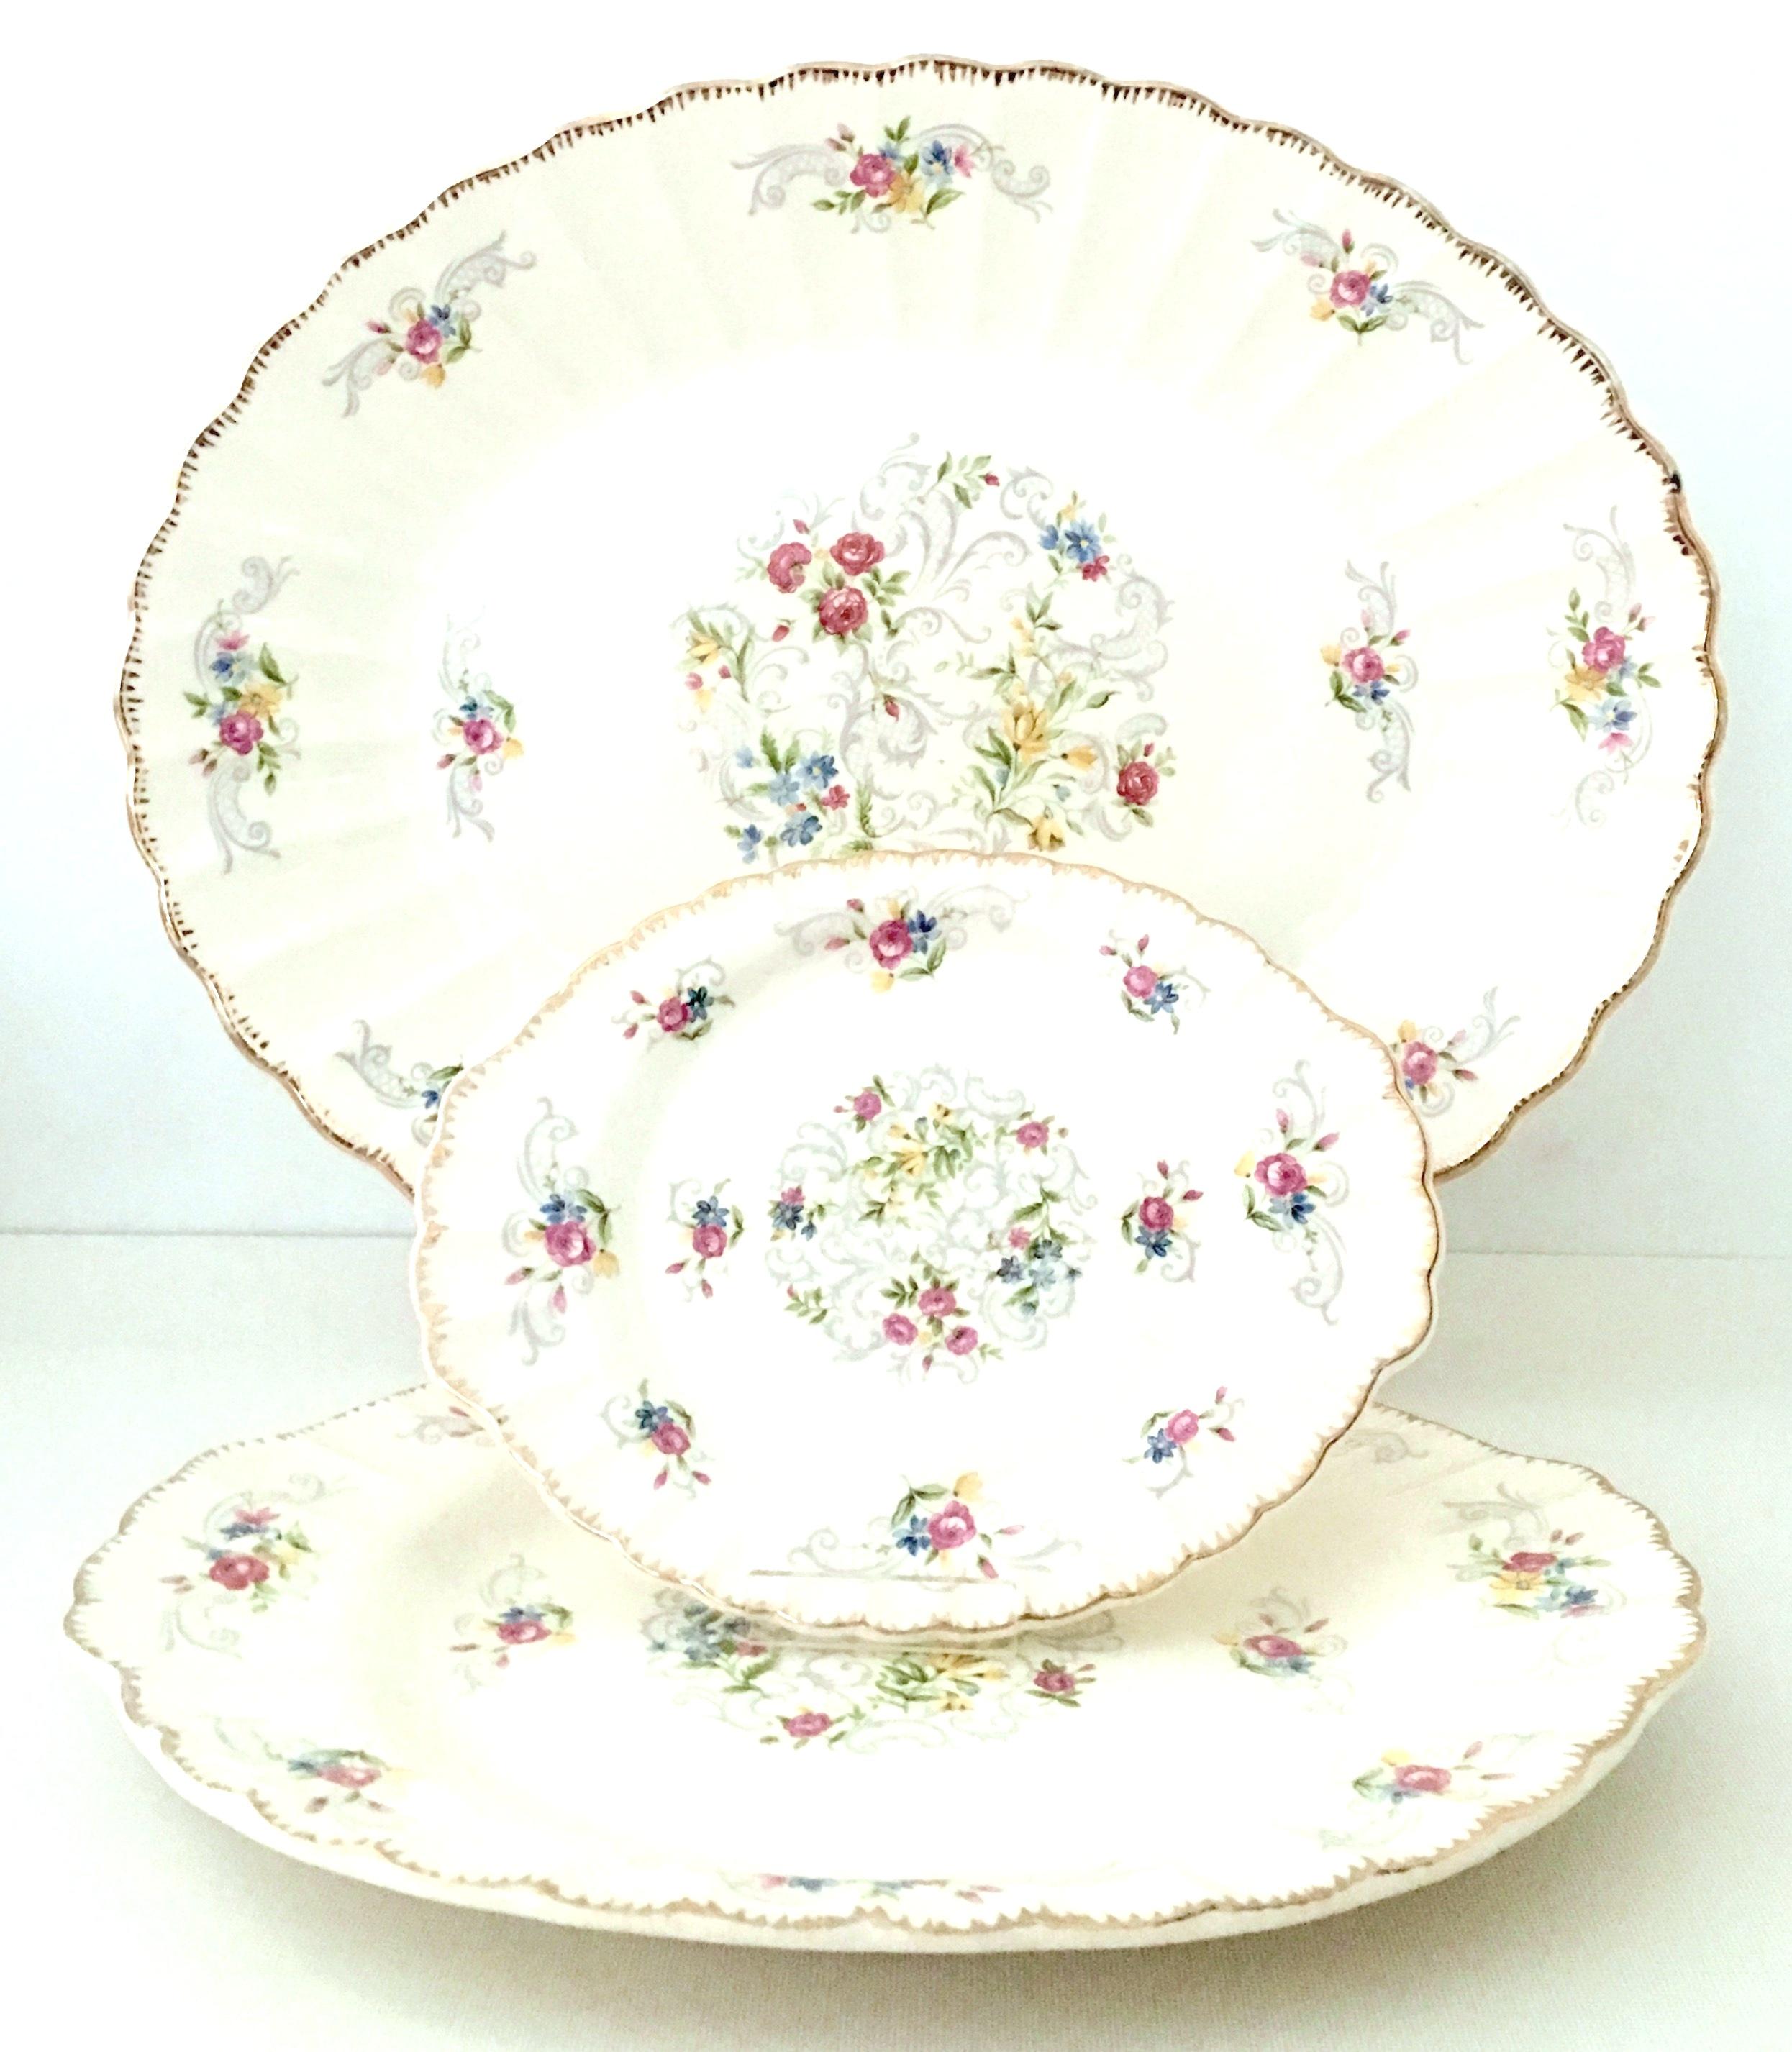 Midcentury American Limoges set of 19 pieces by, Jennie Lind. Pattern features an off-white ground with hand painted filigree 22-karat gold edge and a vibrant with muted gray scroll floral pattern. Each piece is signed on the underside, Made In The